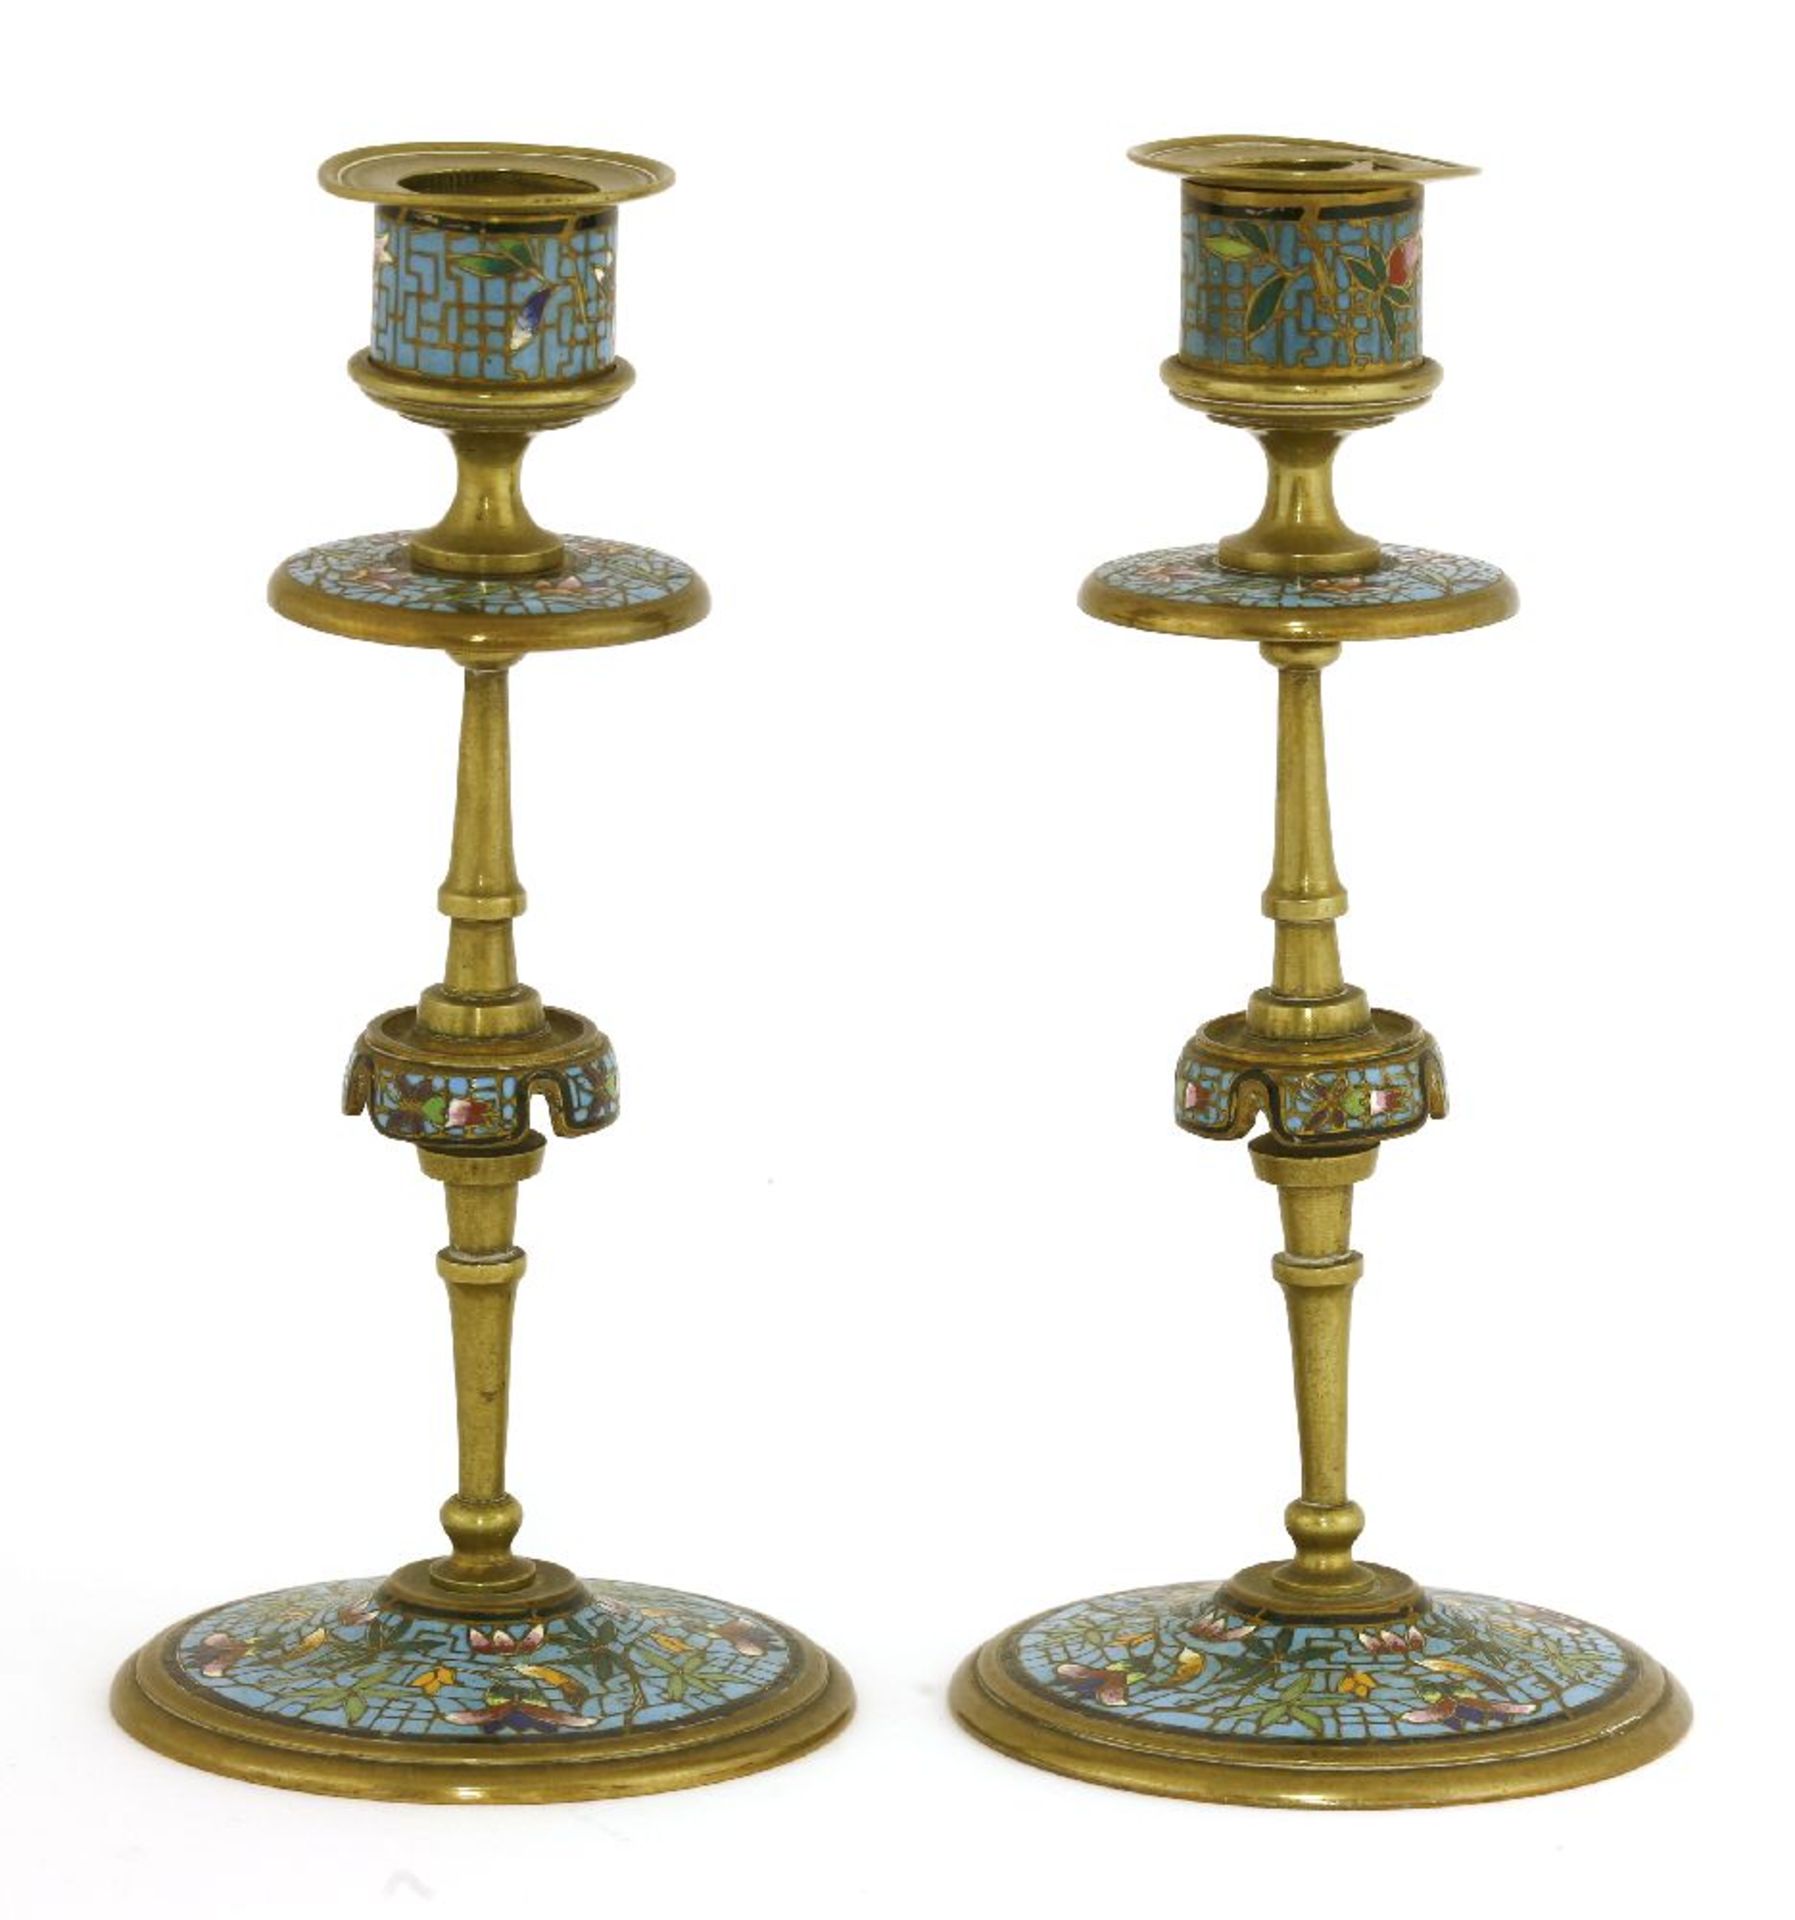 A pair of French brass candlesticks,c.1880, each with a champlevé enamel turquoise ground,18cm